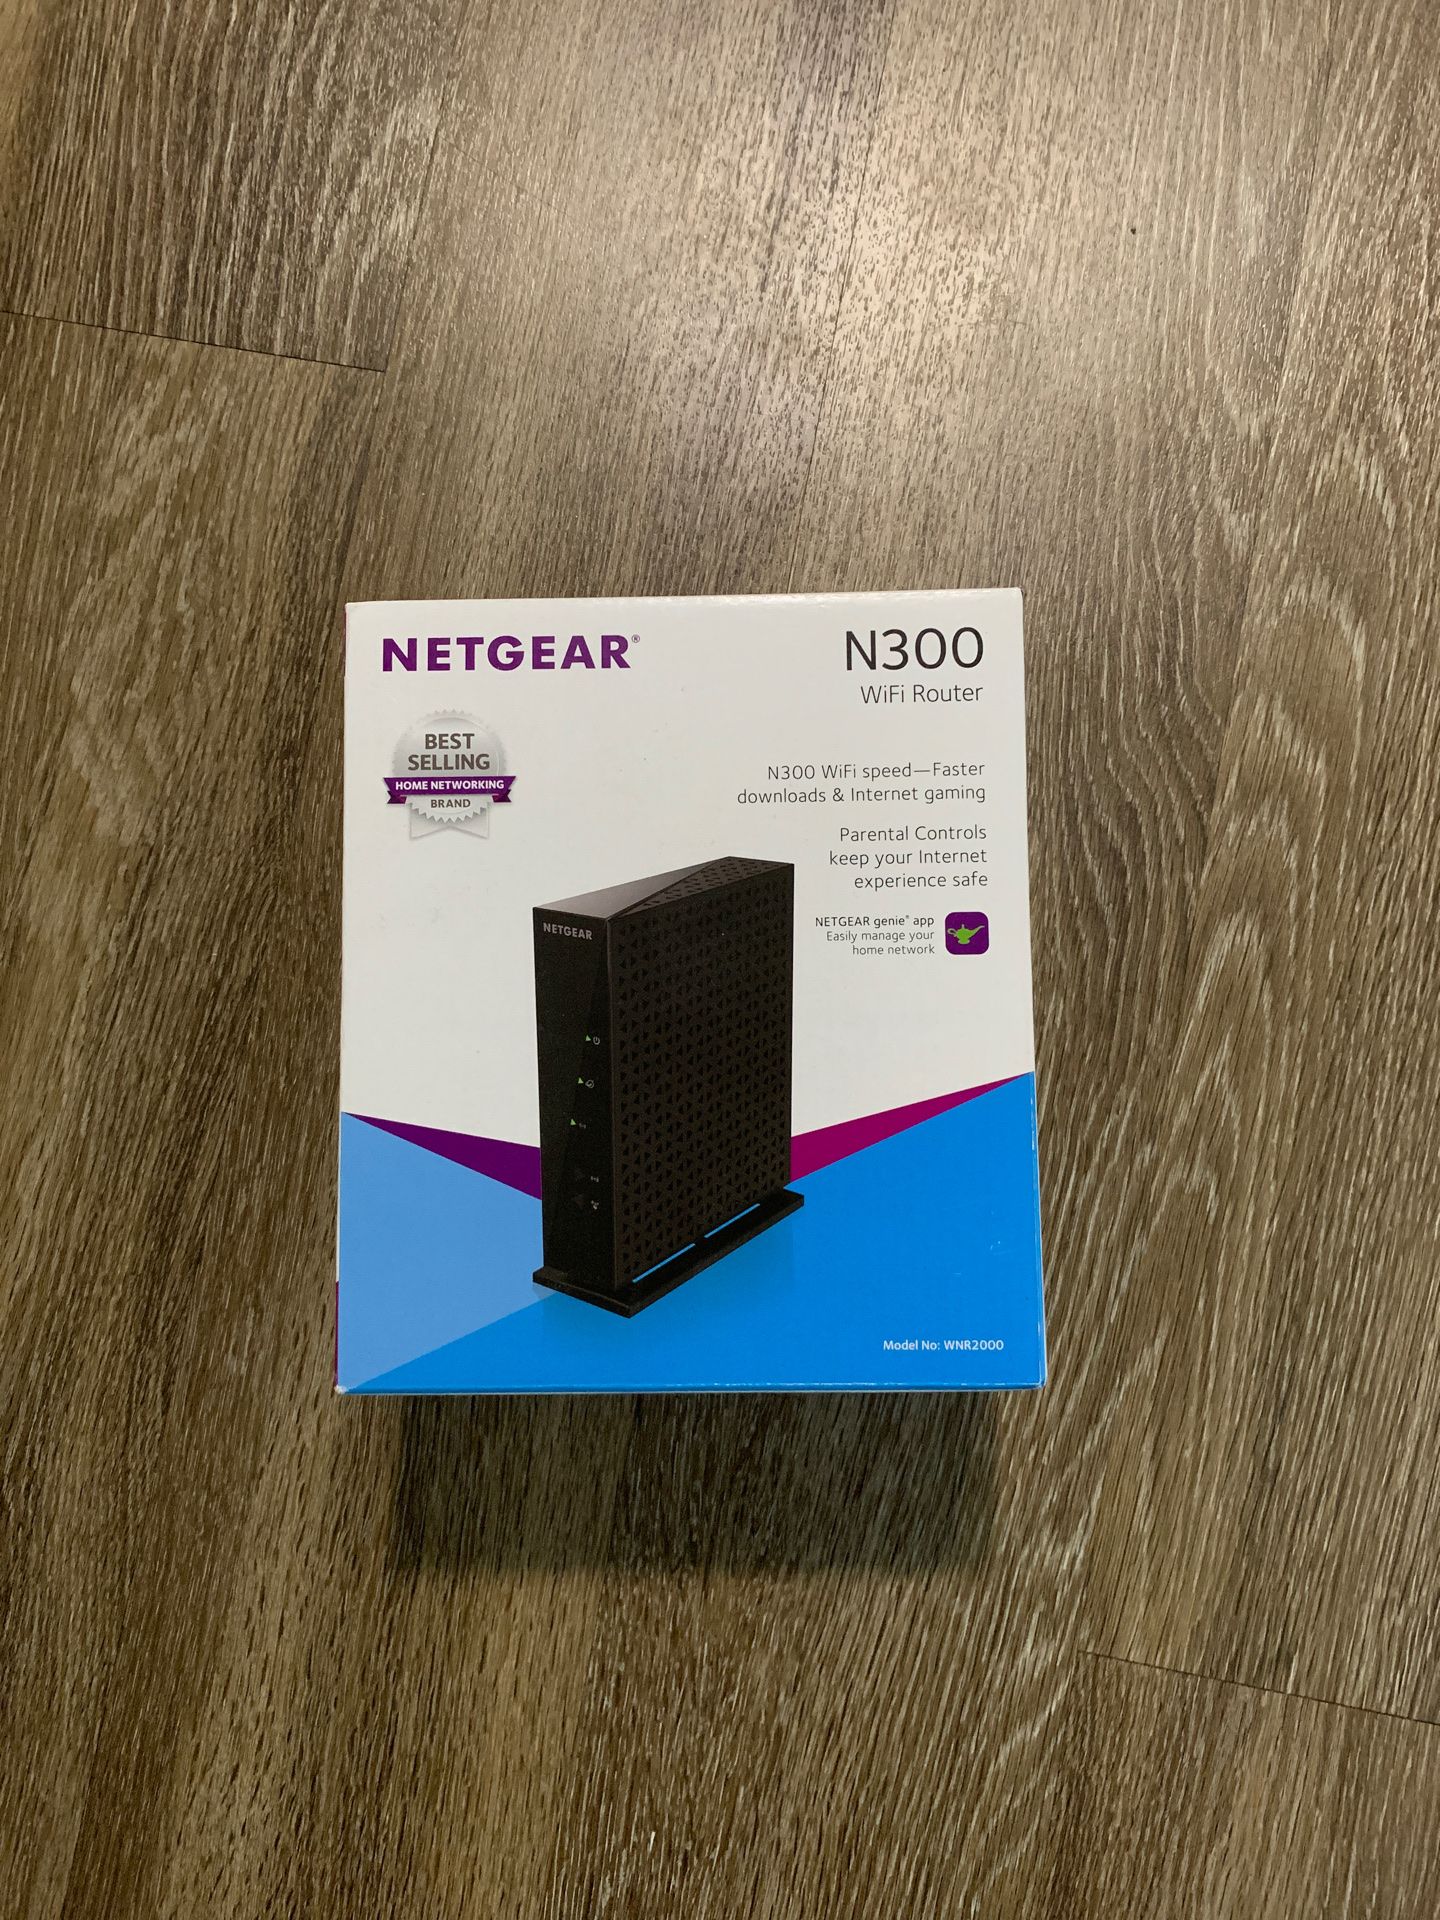 New Netgear Router - Great for apartments